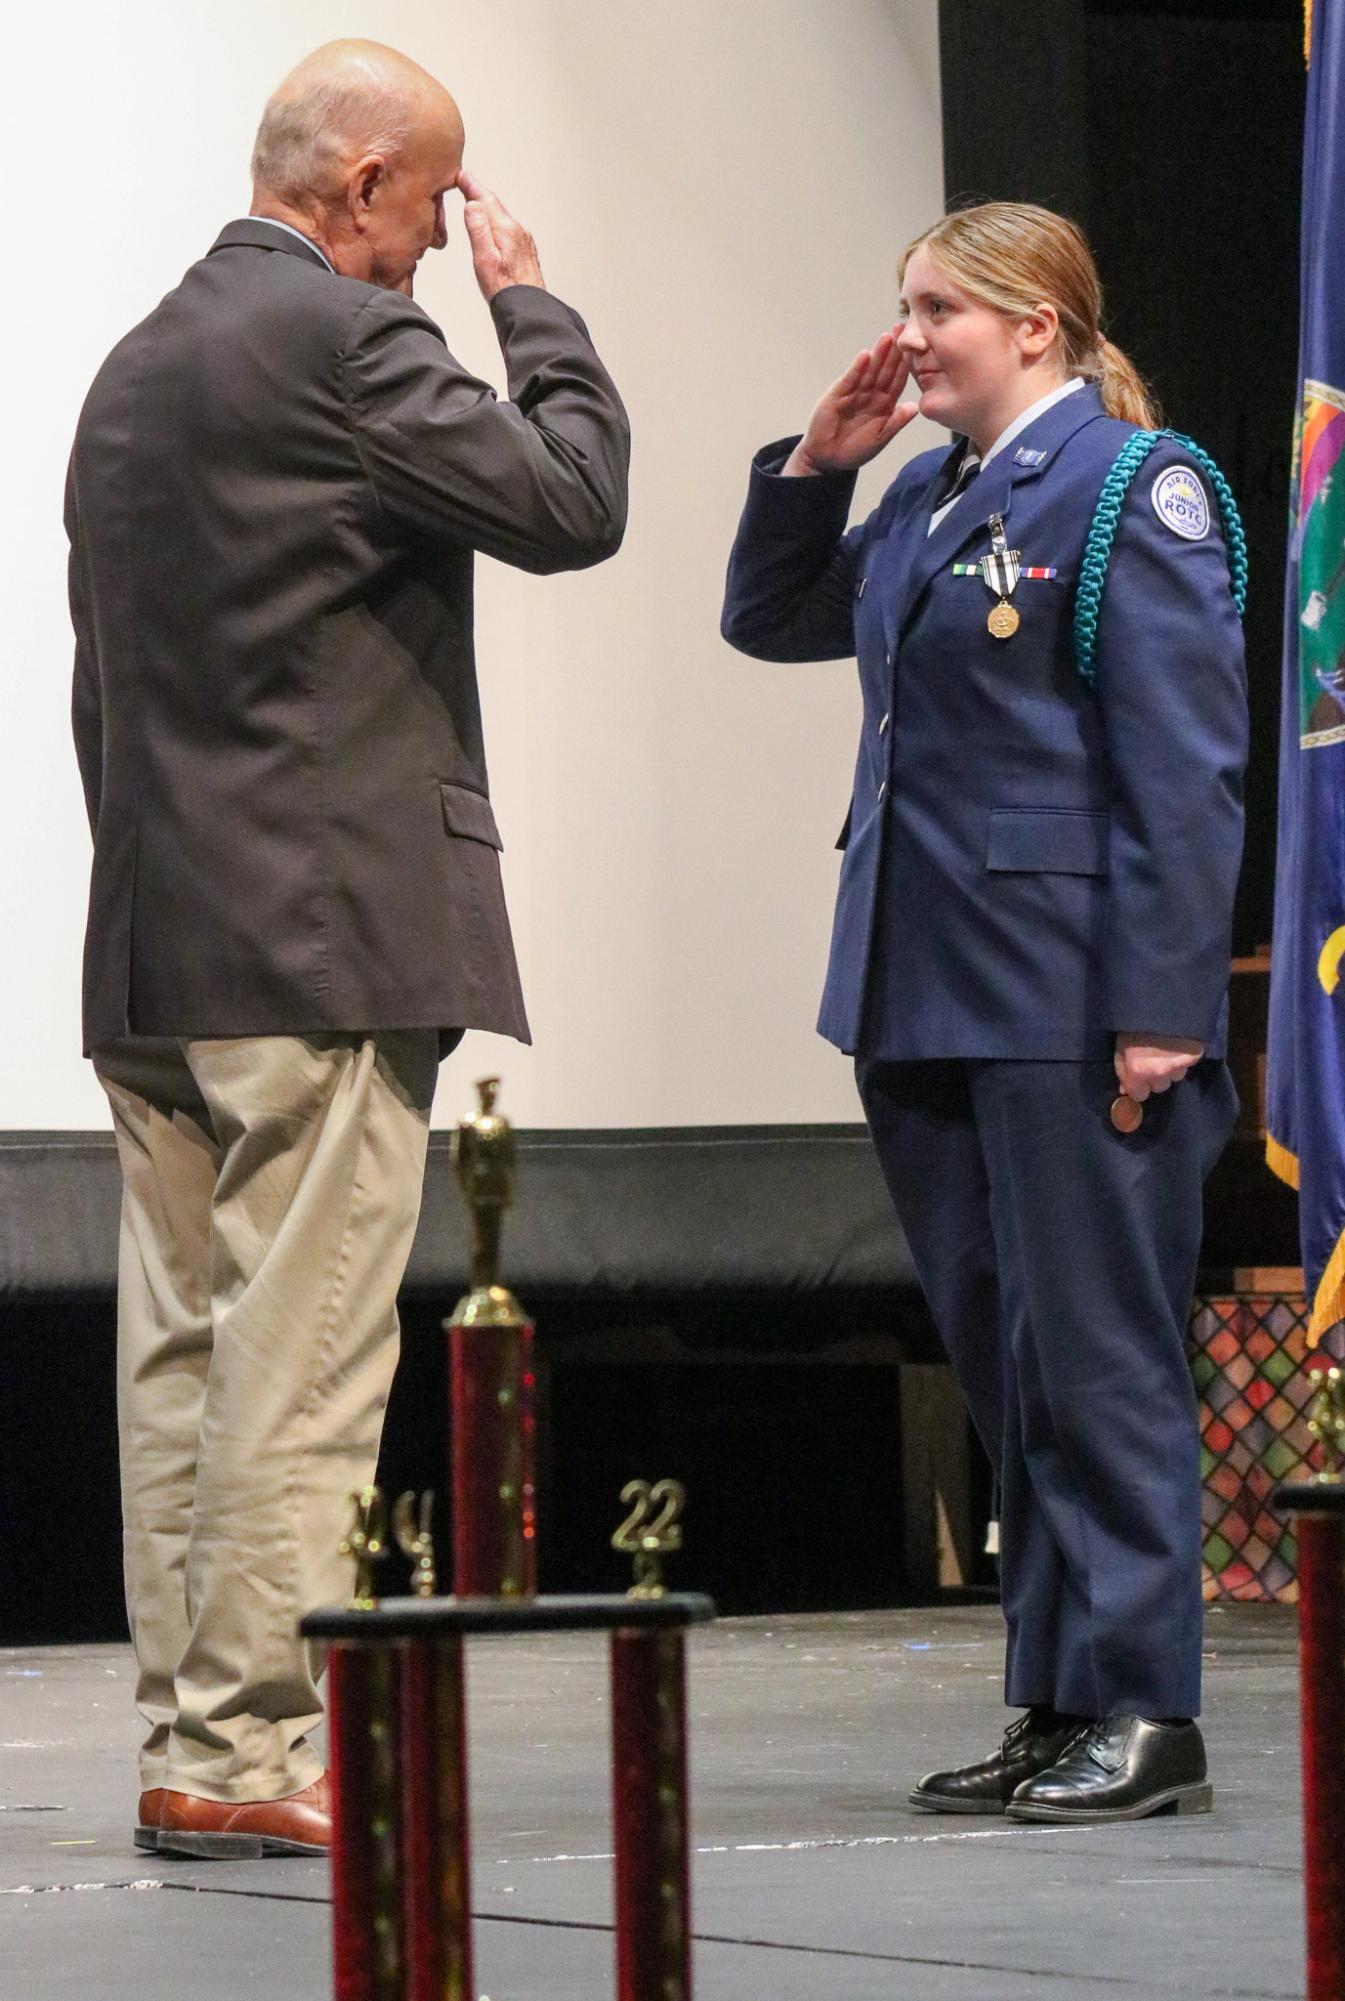 AFJROTC+Annual+Awards+Ceremony+%28Photos+by+Laylah+Allen%29